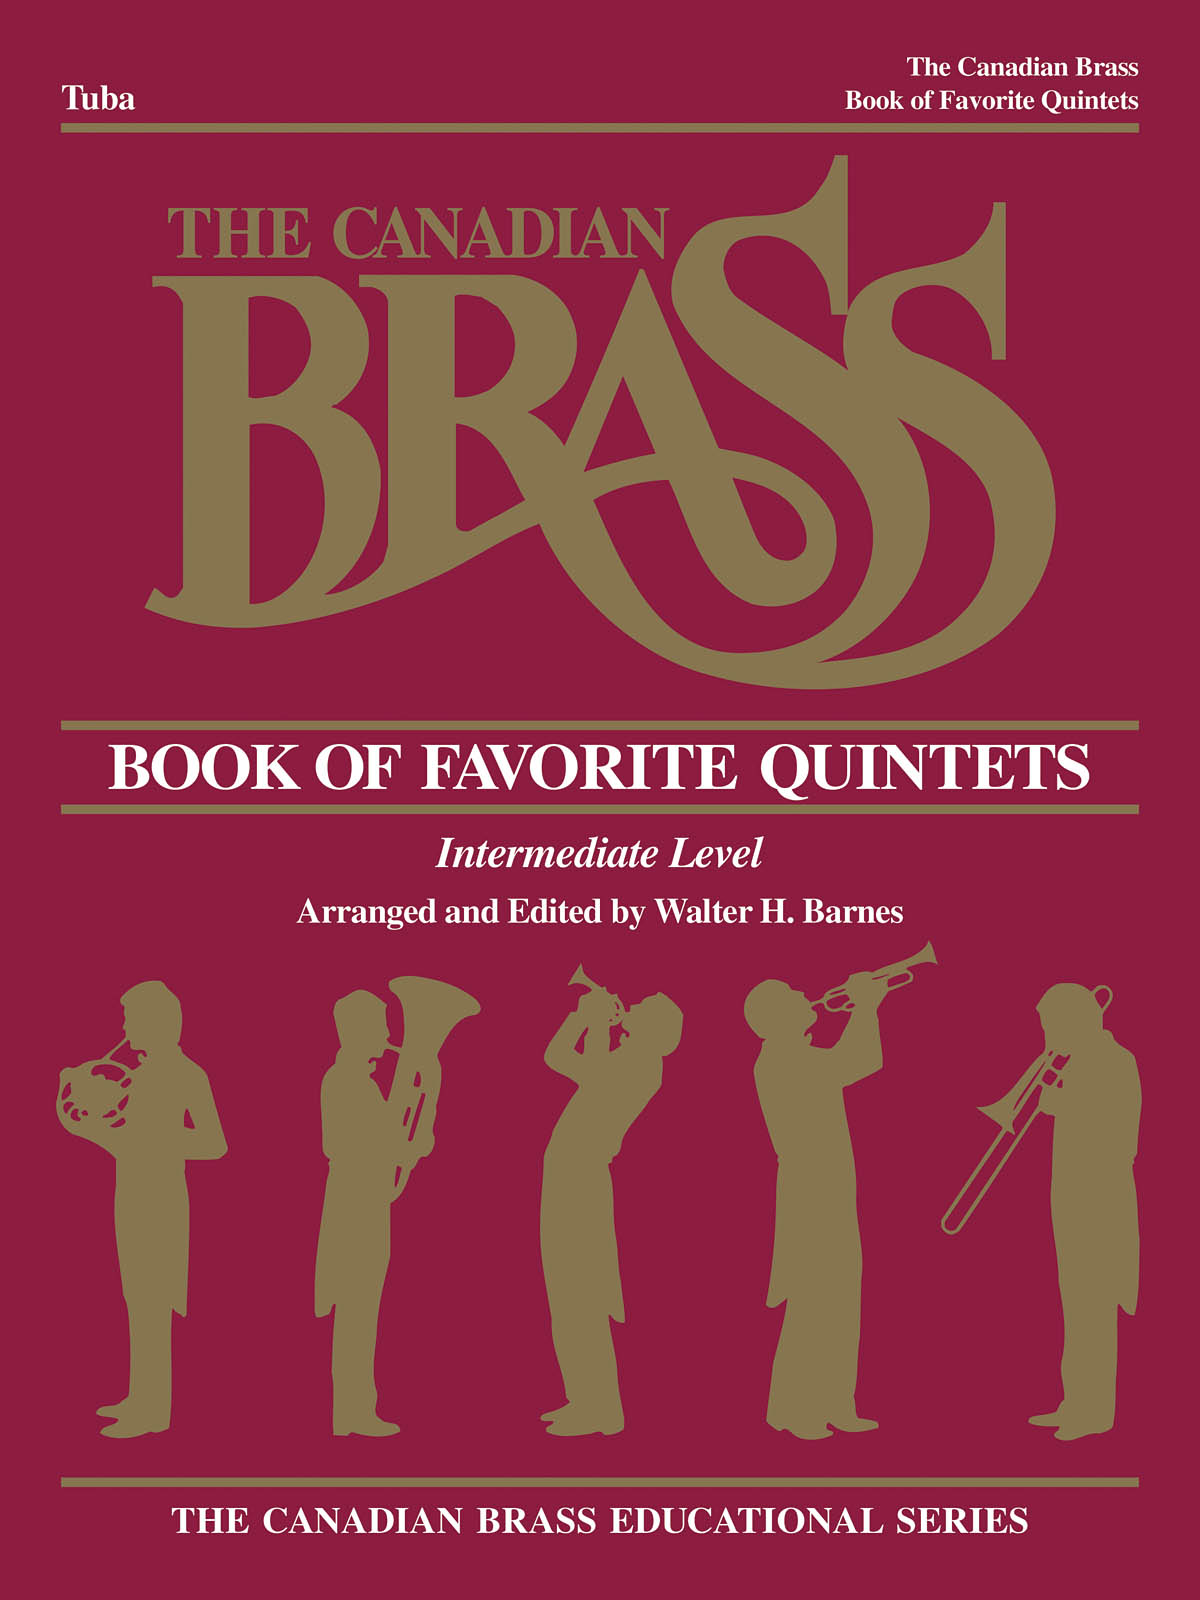 The Canadian Brass: The Canadian Brass Book of Favorite Quintets: Tuba: